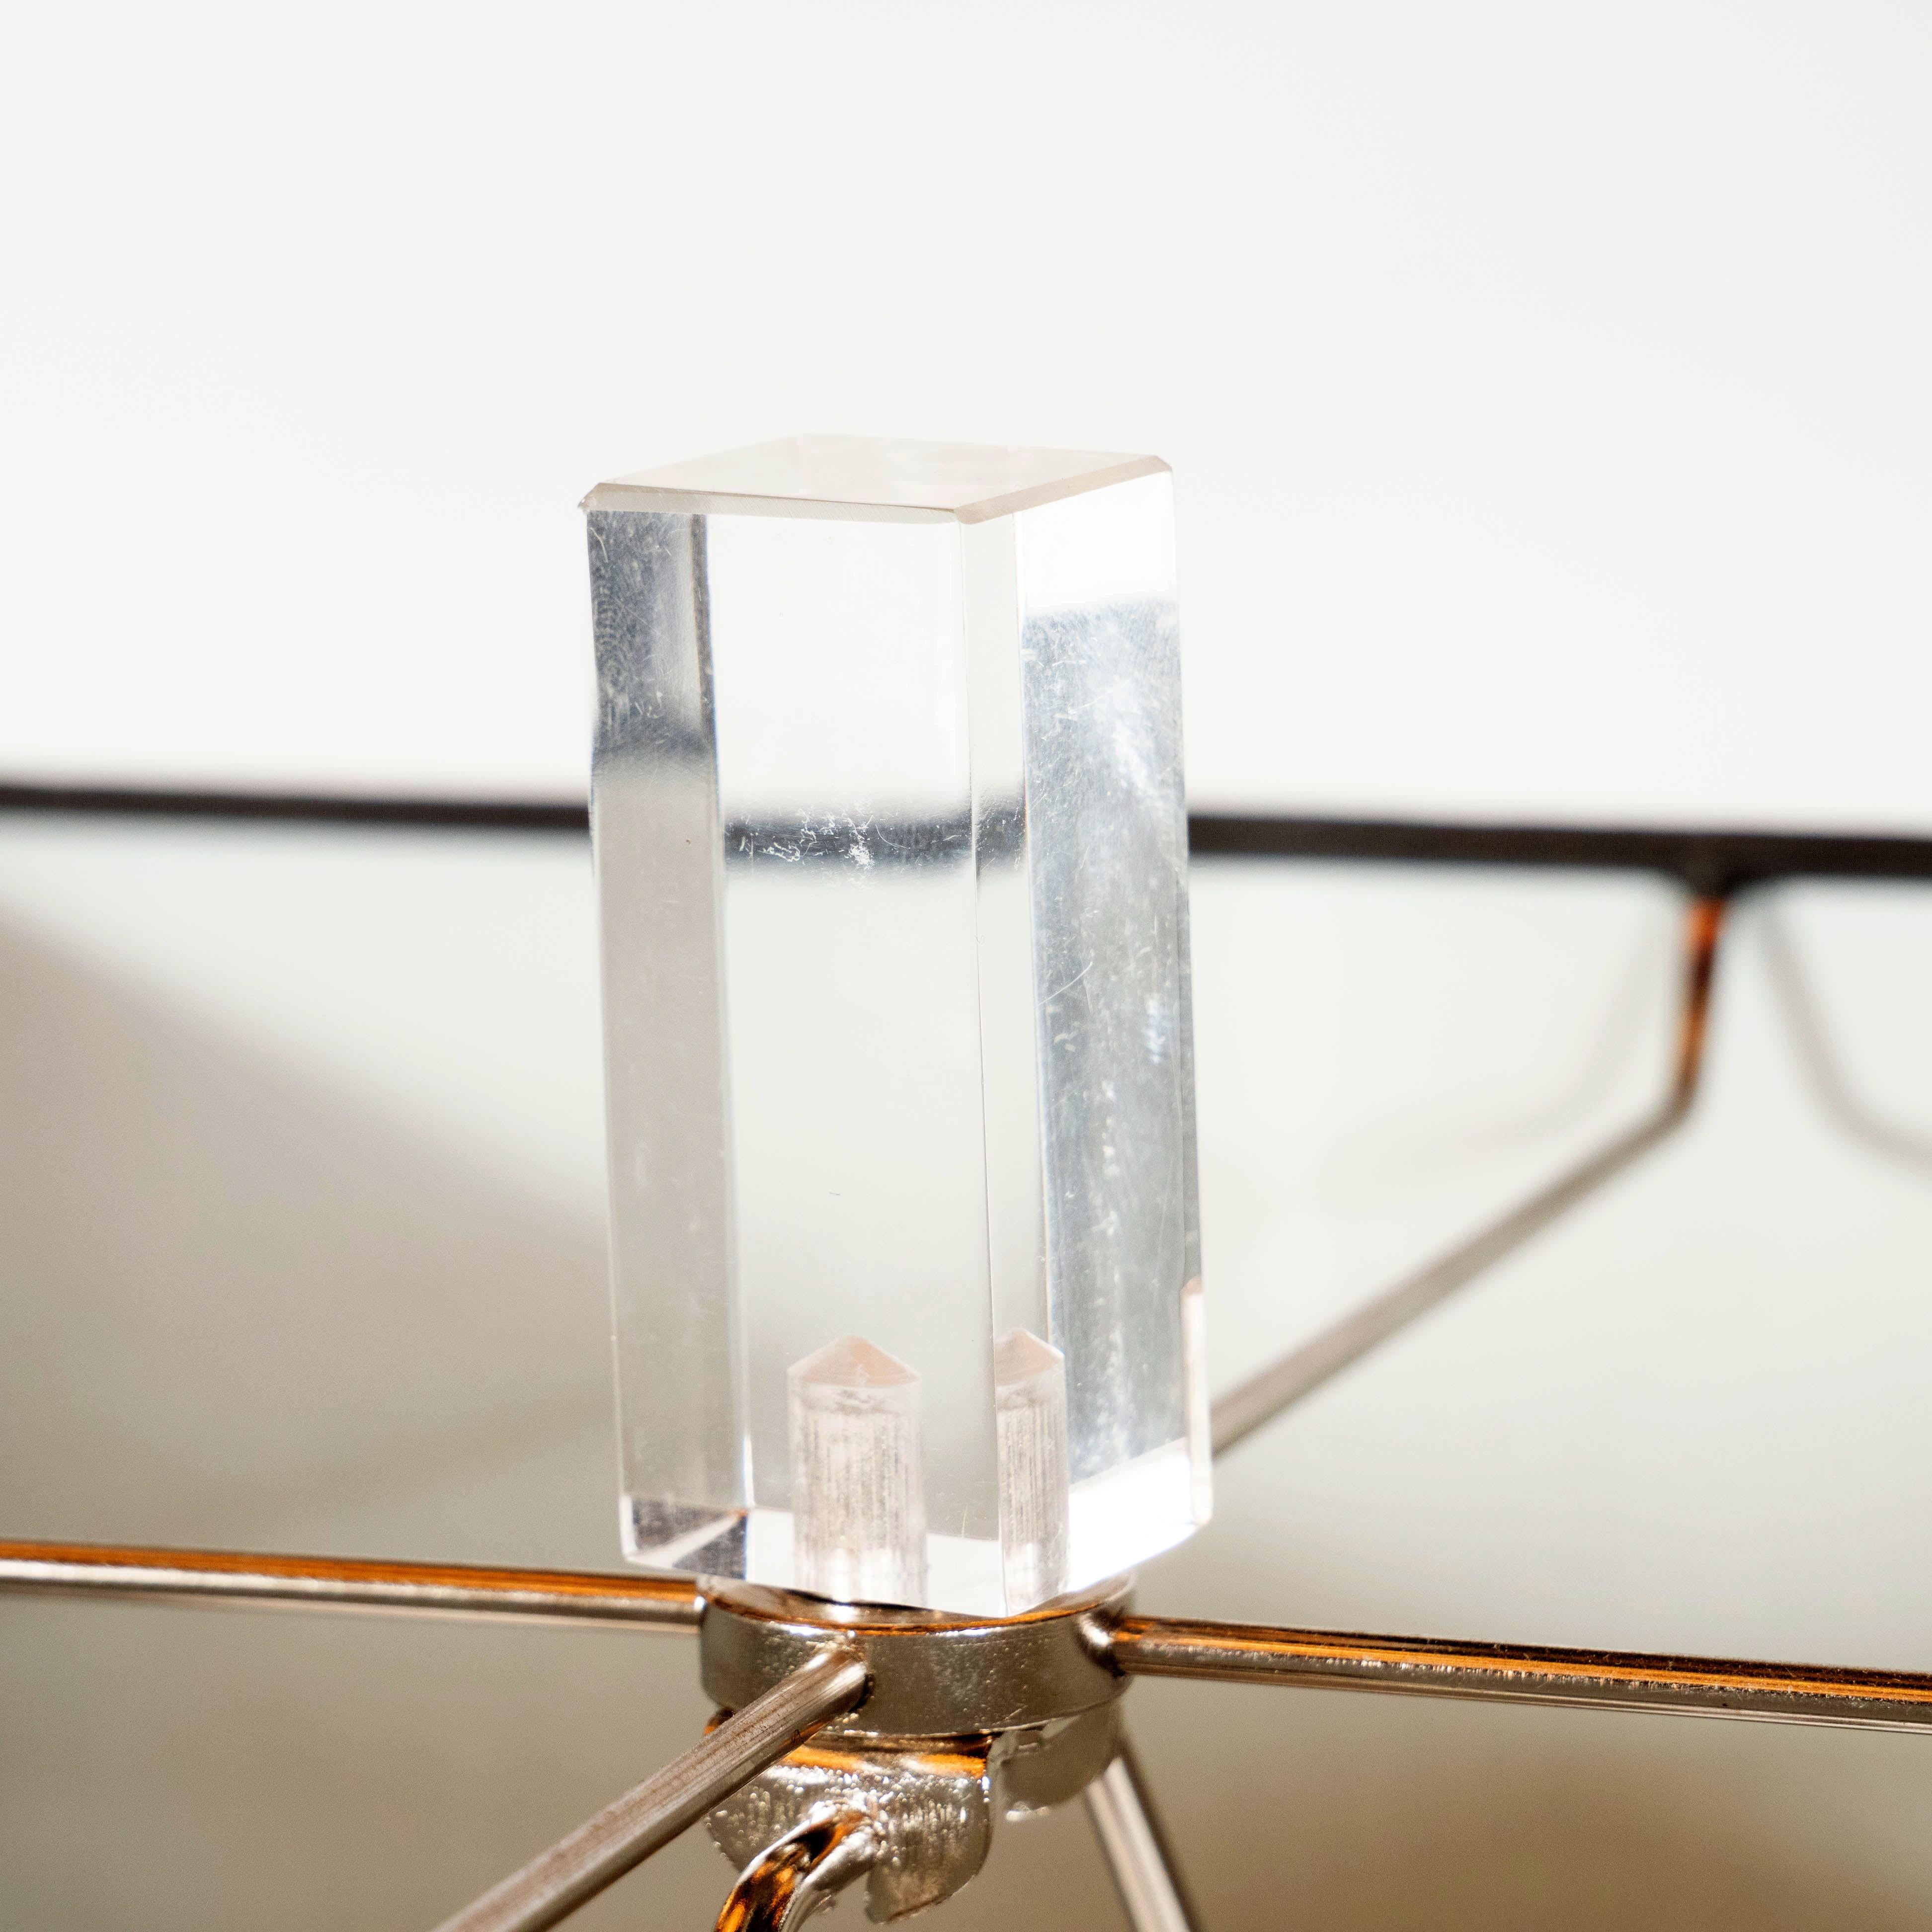 Late 20th Century Mid-Century Modern Stacked Lucite Skyscraper Table Lamp with Nickel Fittings For Sale